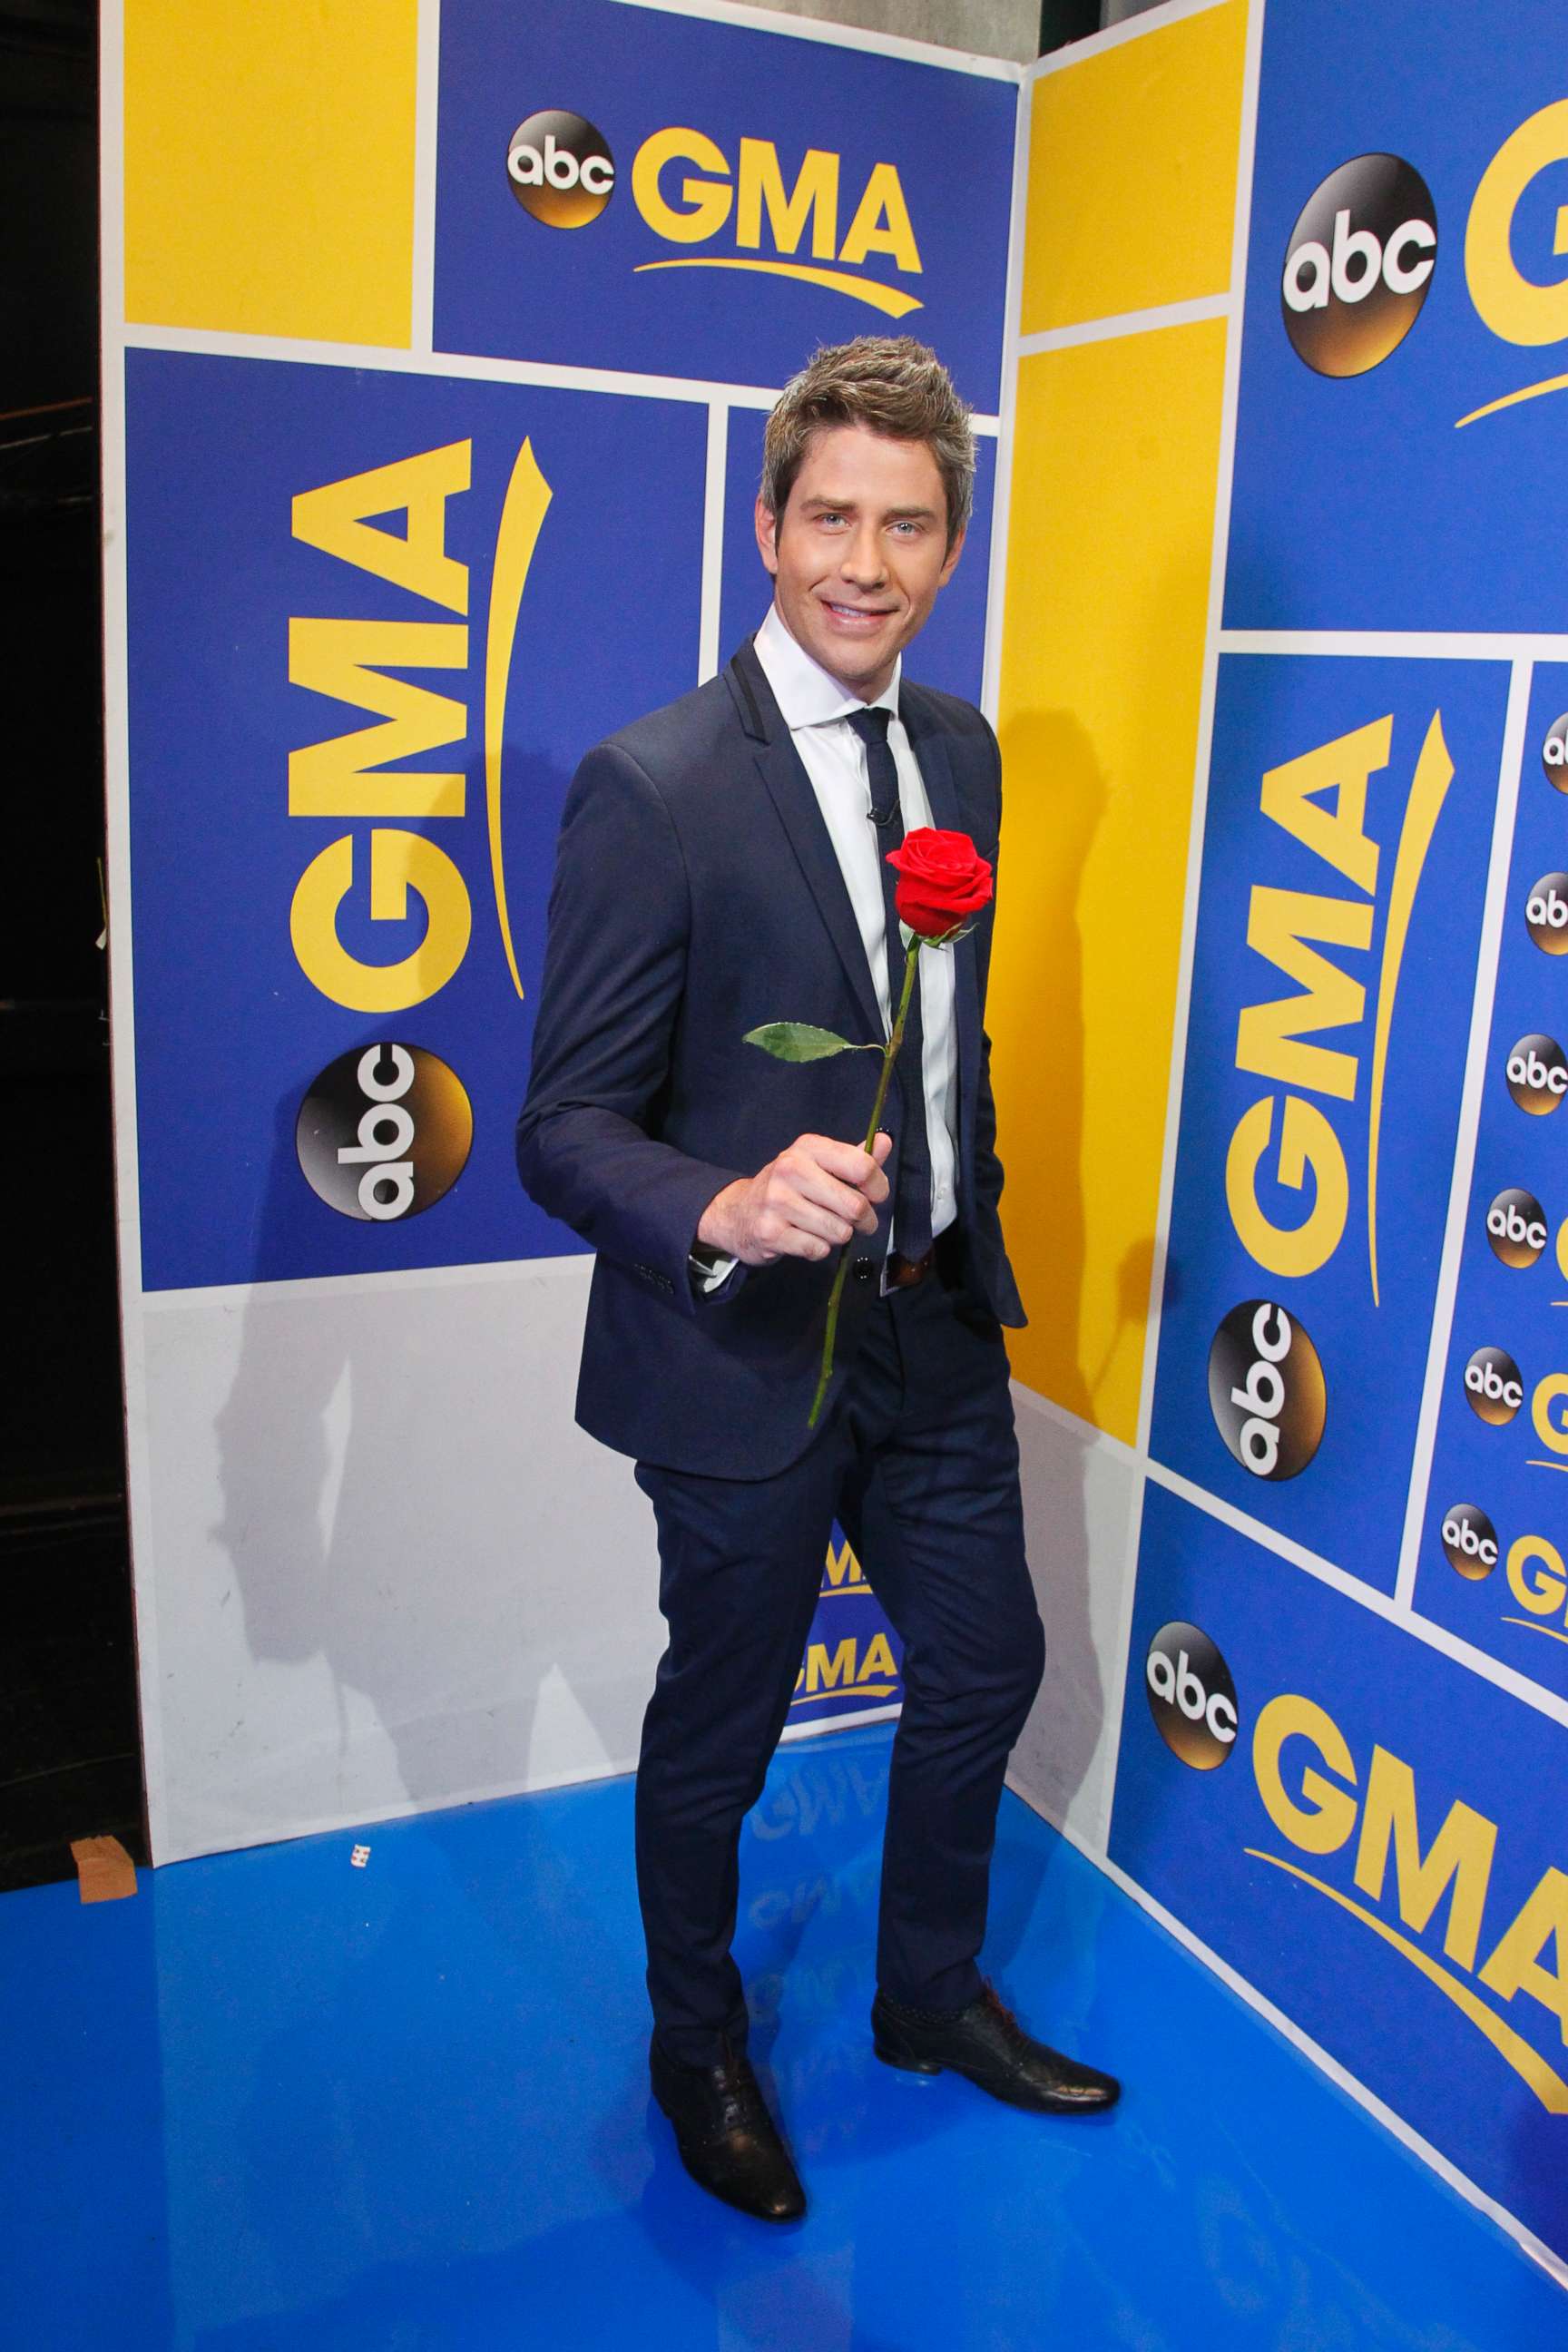 PHOTO: Arie Luyendyk Jr., the race car driver who appeared on season eight of "The Bachelorette" in 2012, was revealed as the new Bachelor on "Good Morning America" on Sept. 7, 2017.